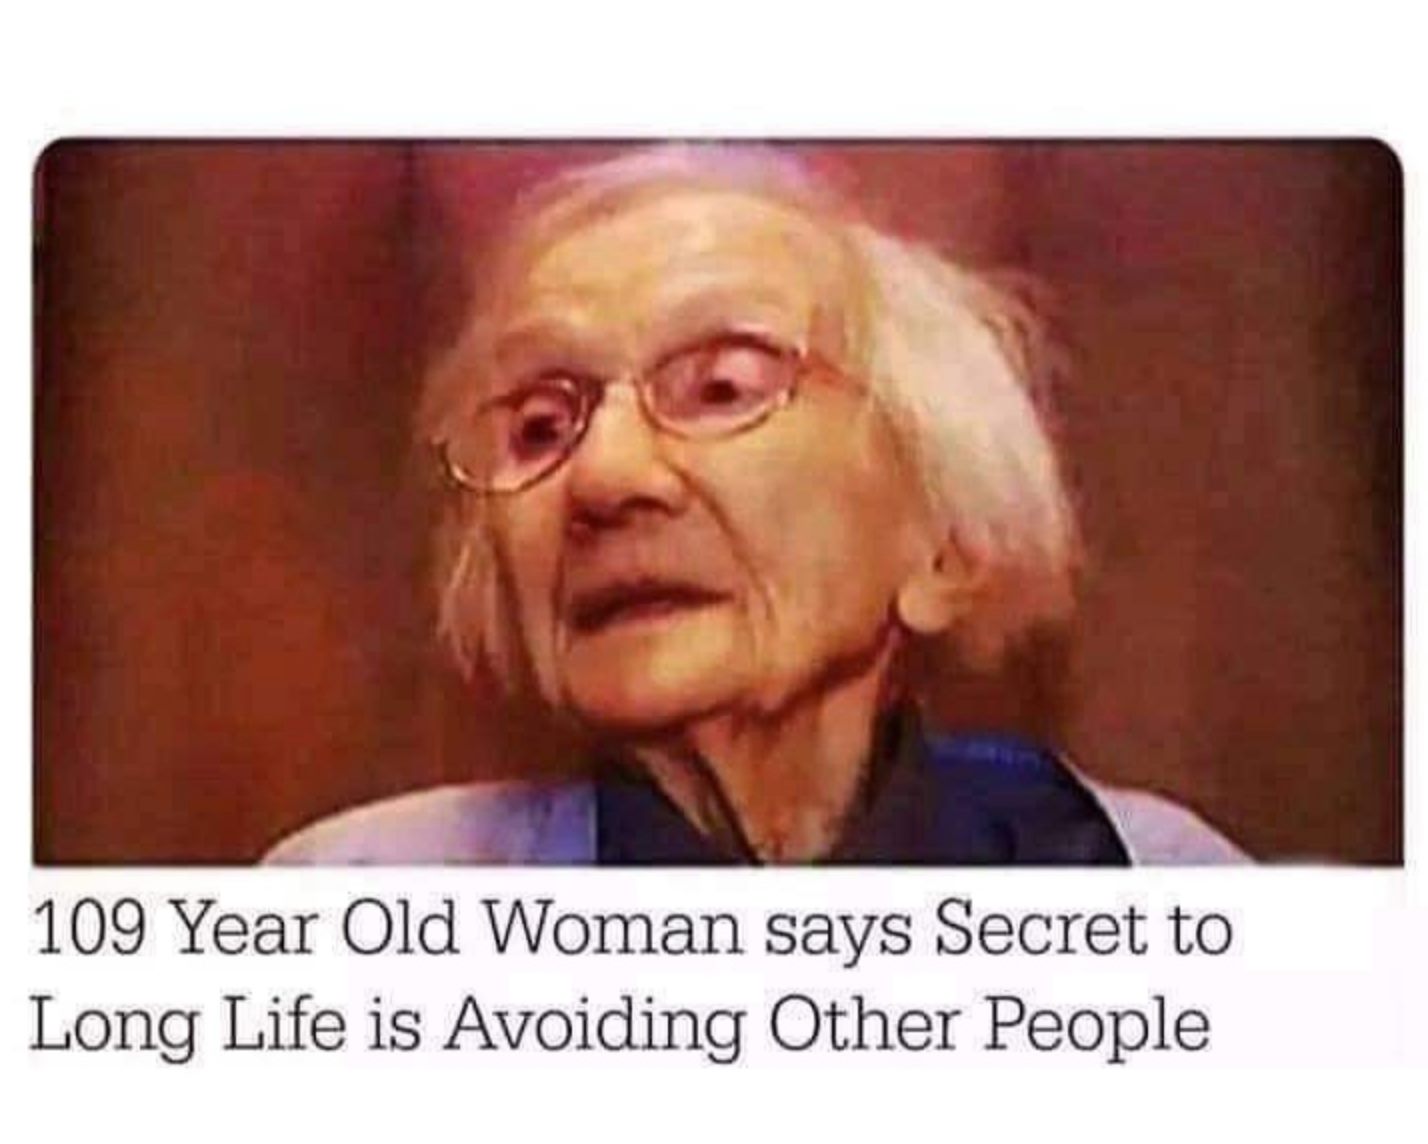 funny leo jokes - 109 Year Old Woman says Secret to Long Life is Avoiding Other People